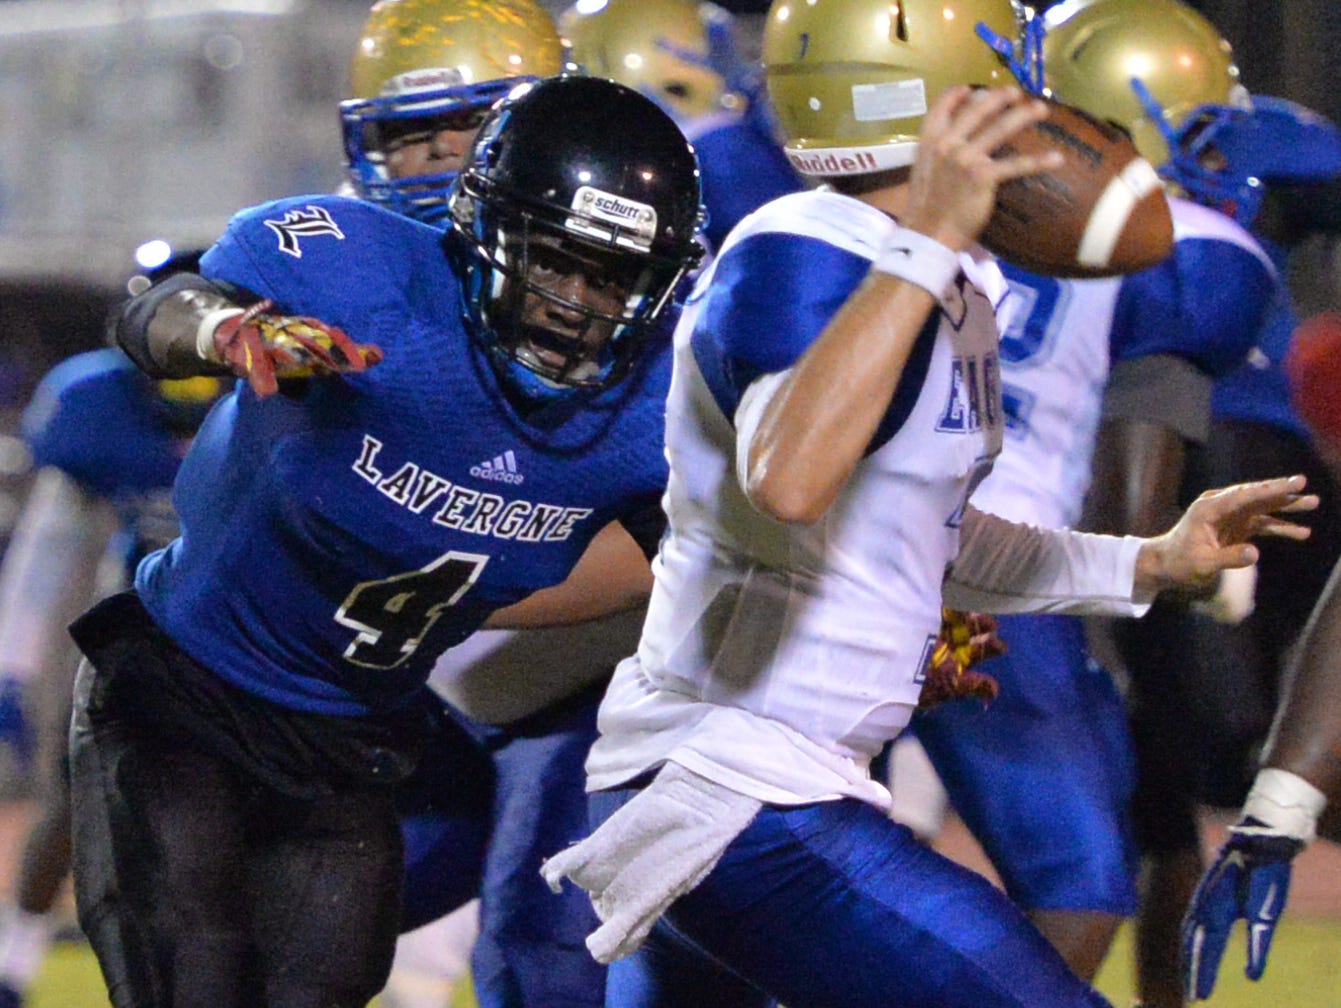 La Vergne junior Maleik Gray committed to play football at Tennessee on Sunday.